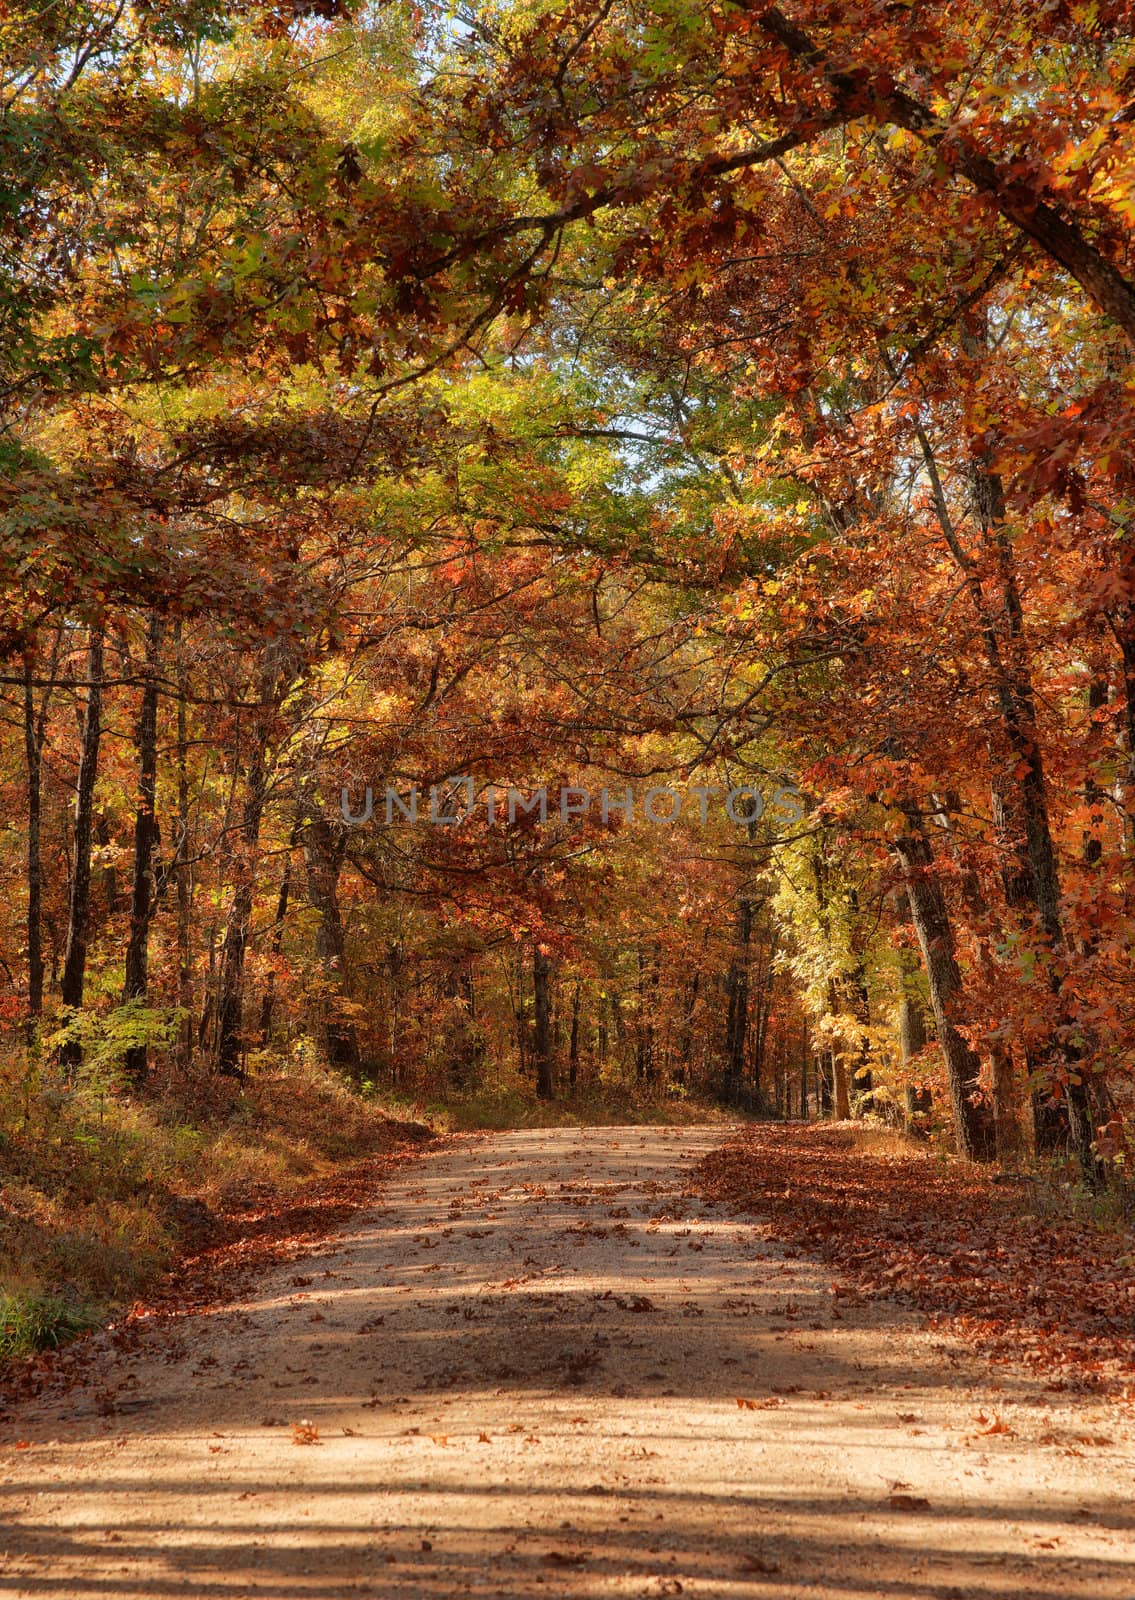 country rural road through the forest in autumn or fall